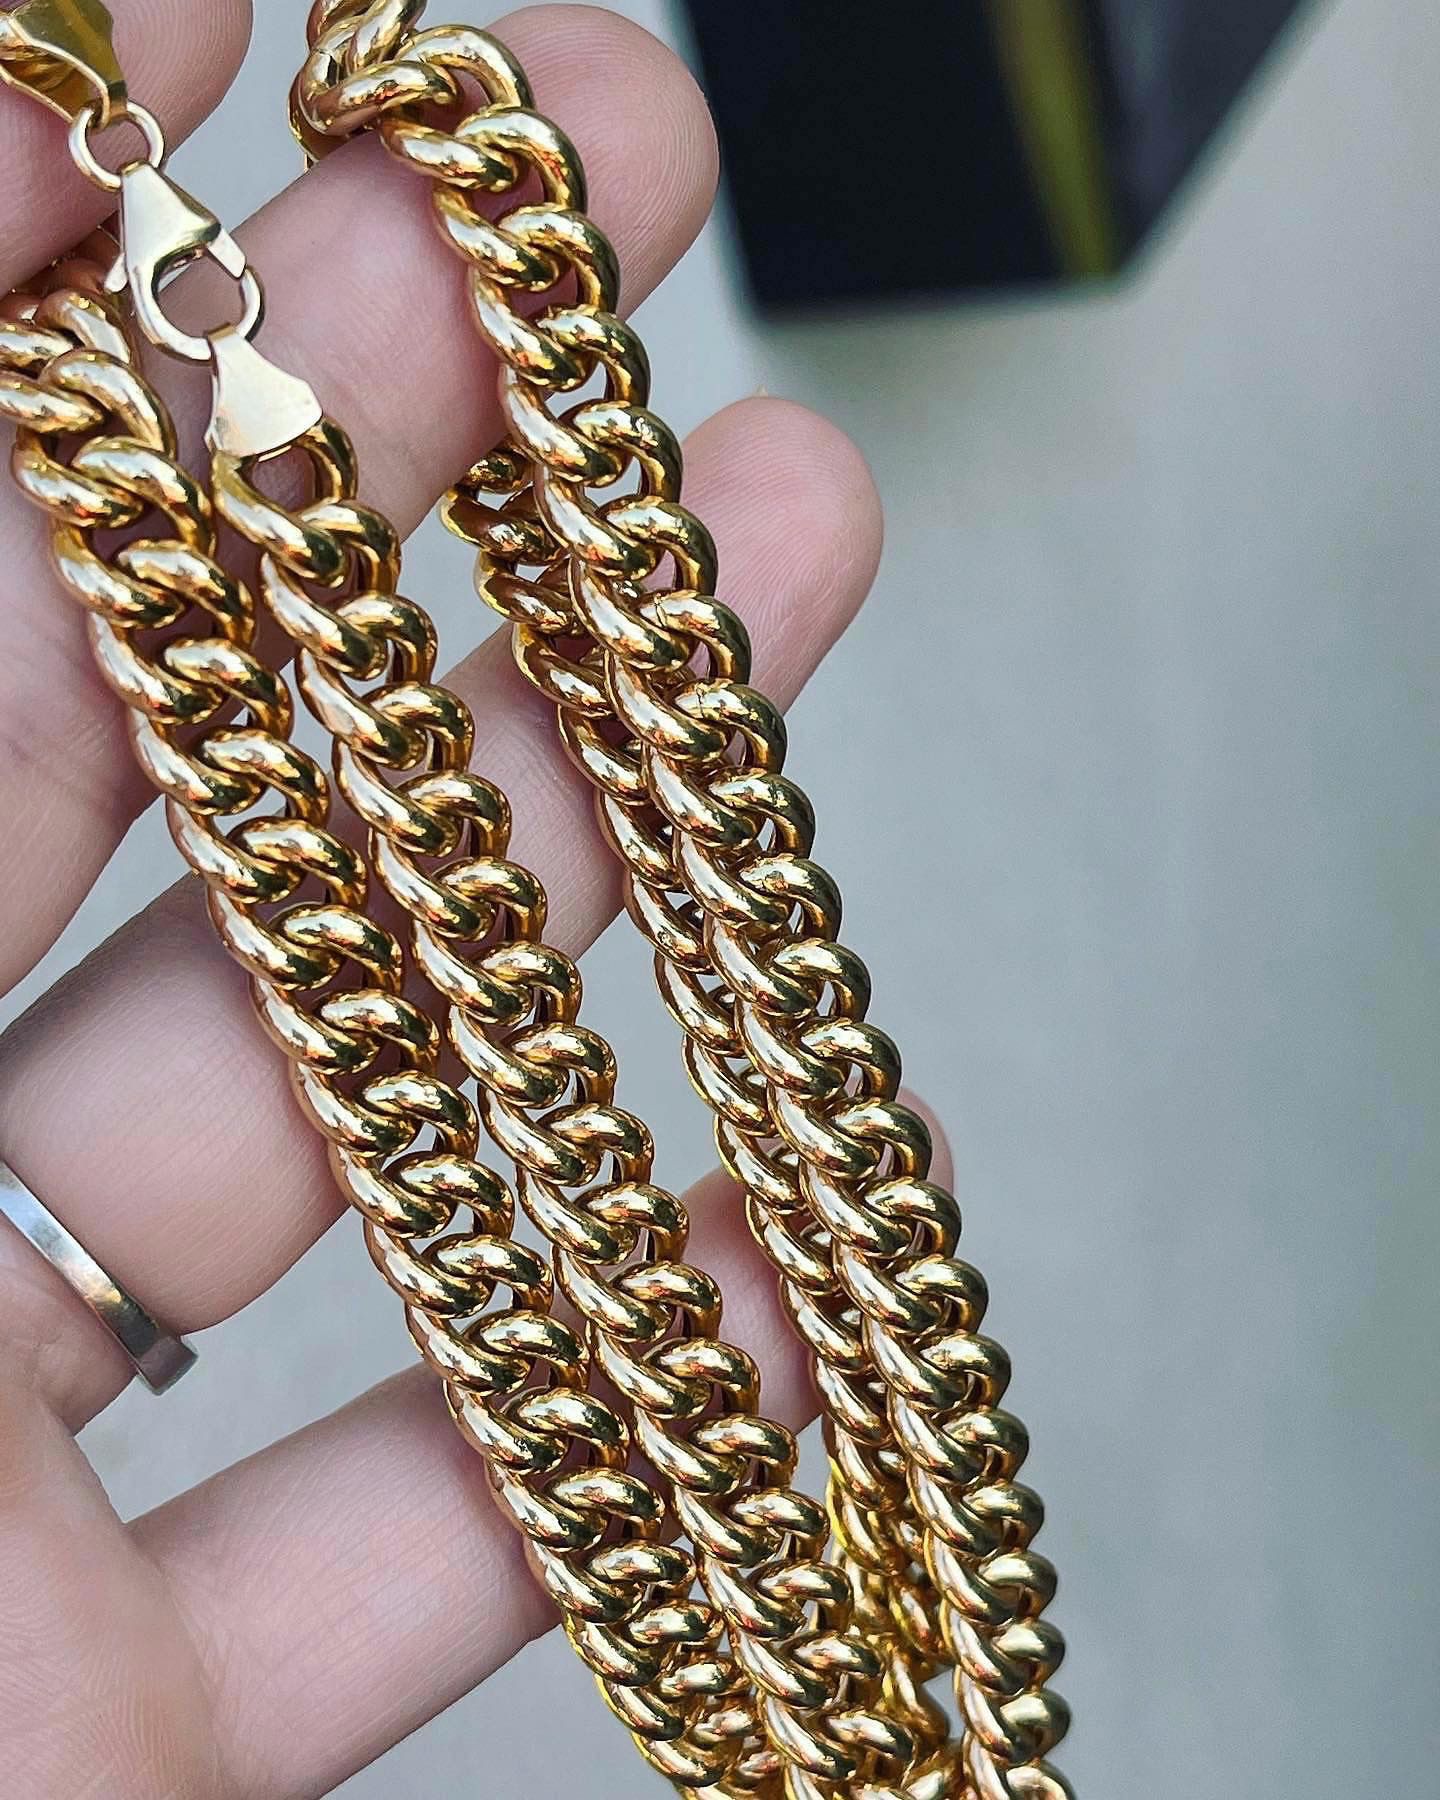 Gold Cuban Link Louis Vuitton Chain for Sale in Hawthorne, CA - OfferUp